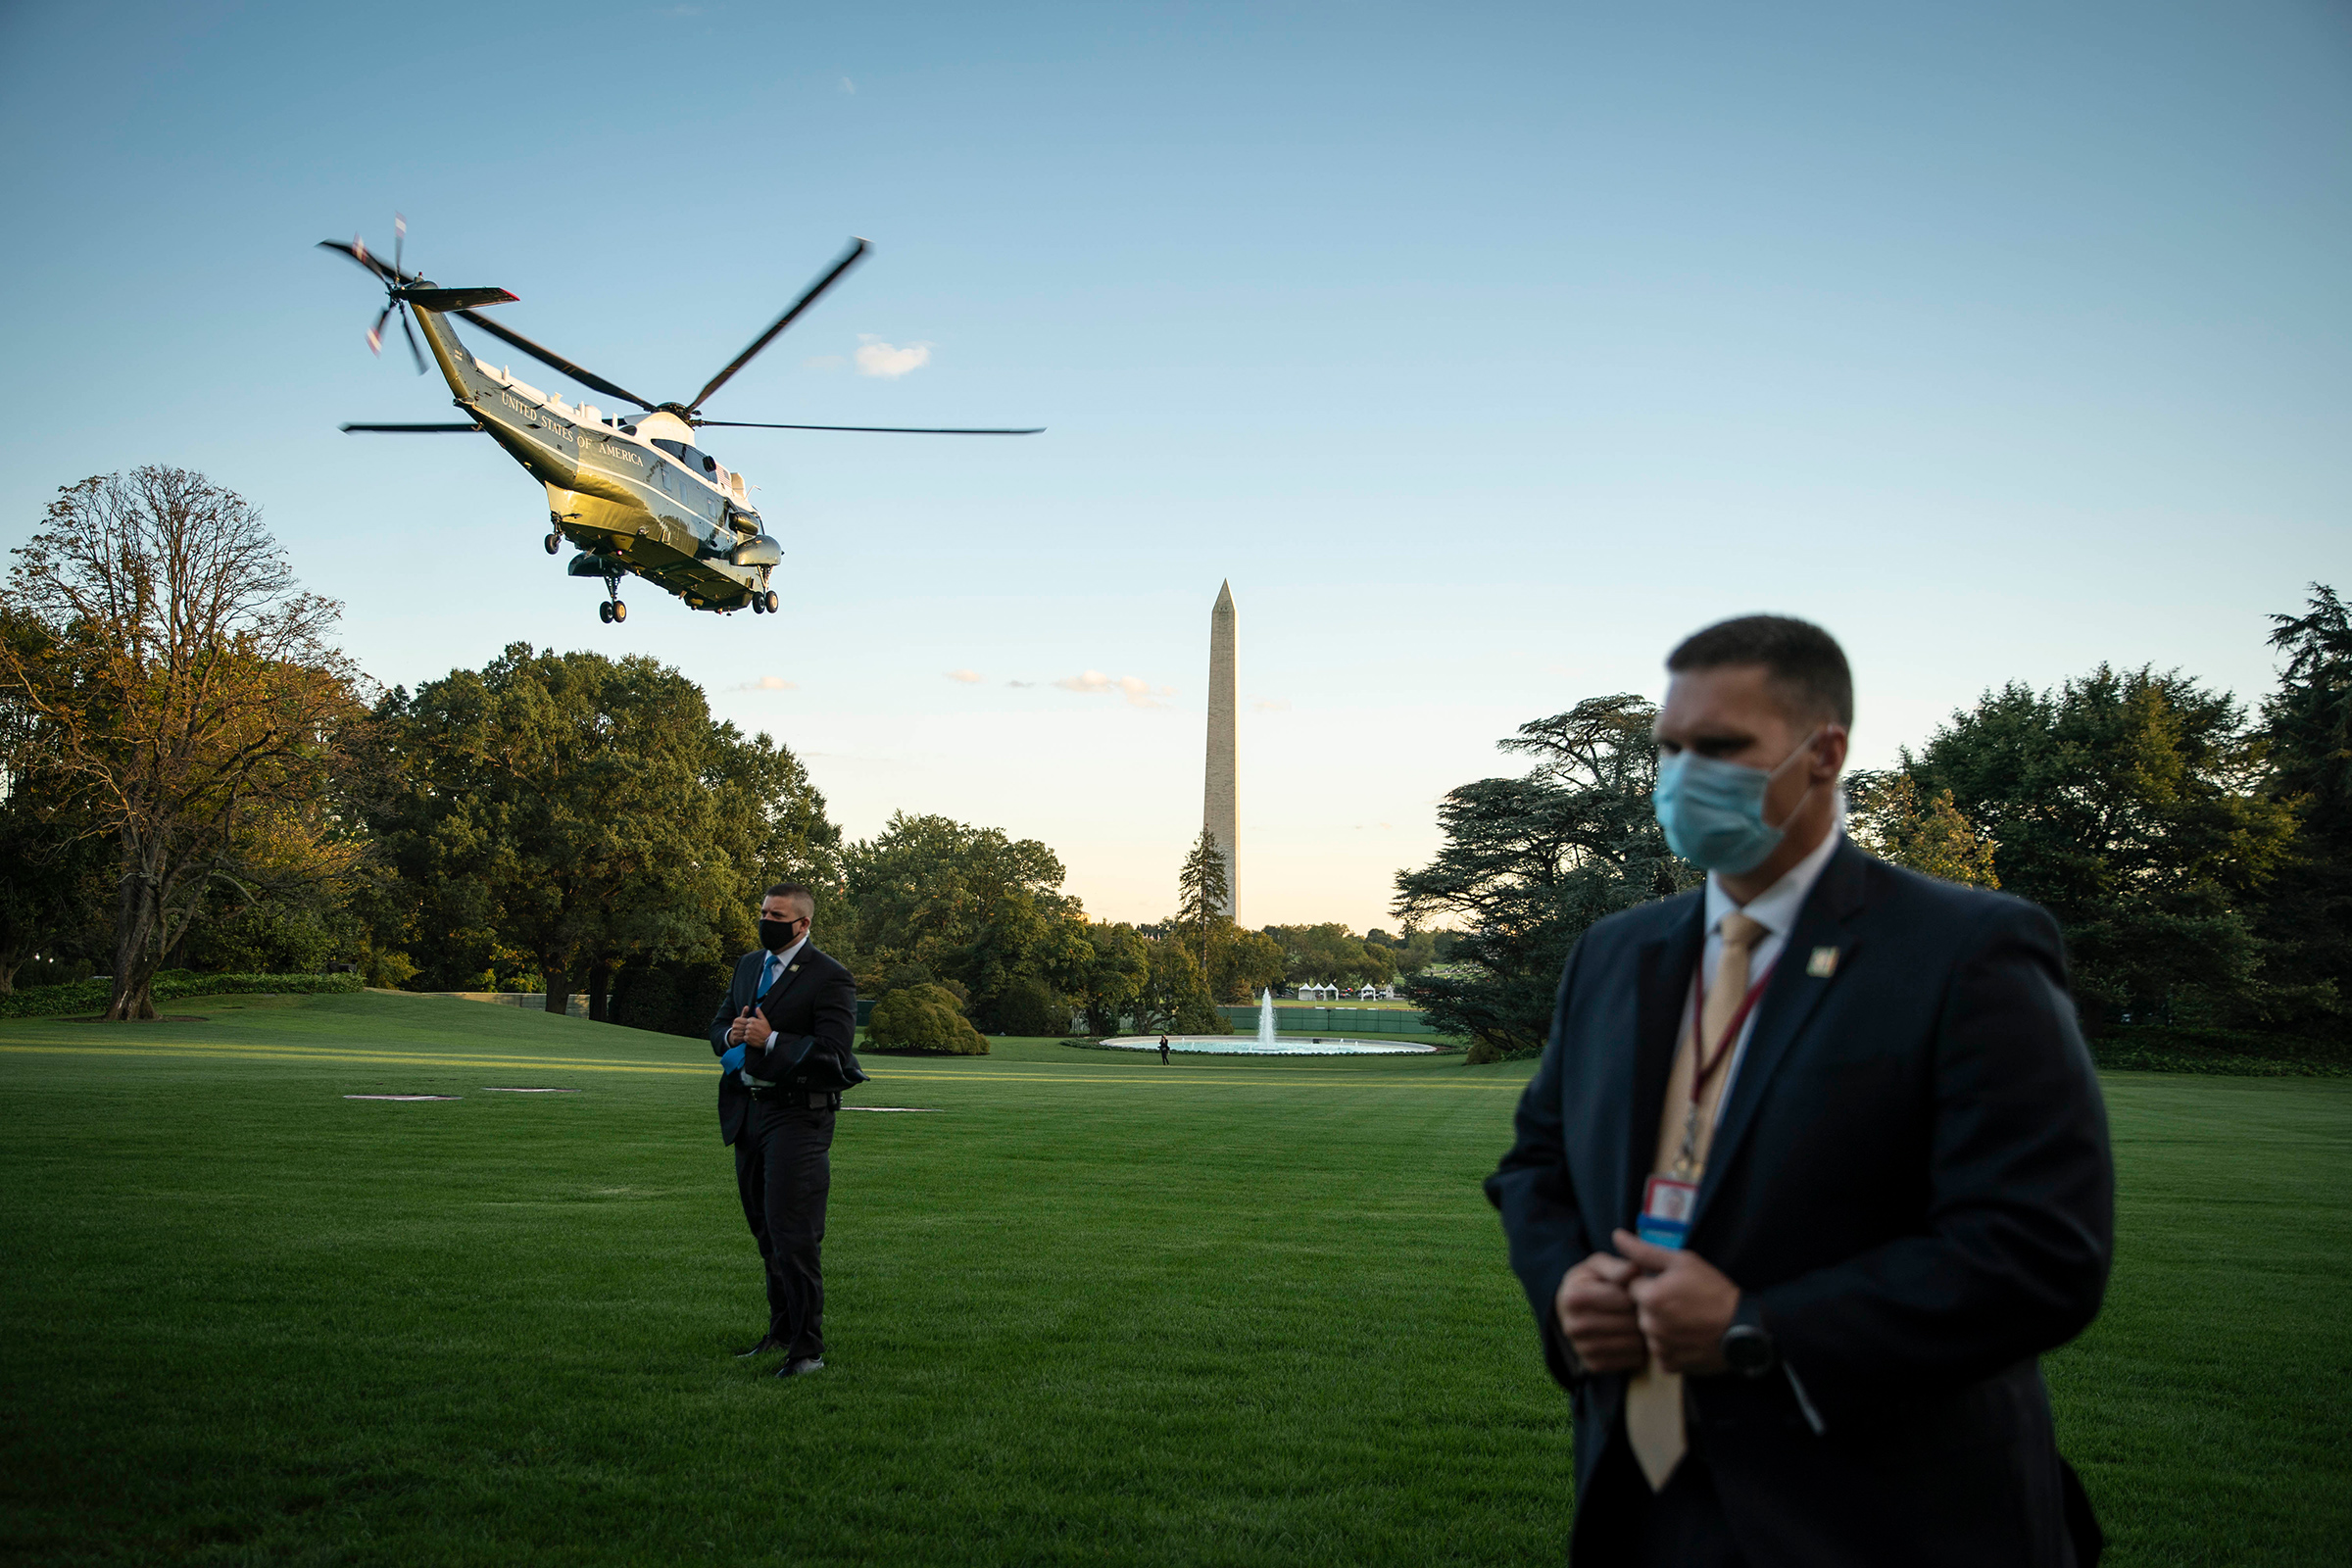 Secret Service agents wearing protective face masks stand by as Marine One, carrying President Trump, departs from the South Lawn of the White House on Oct. 2. (Sarah Silbiger—Pool/Sipa USA)